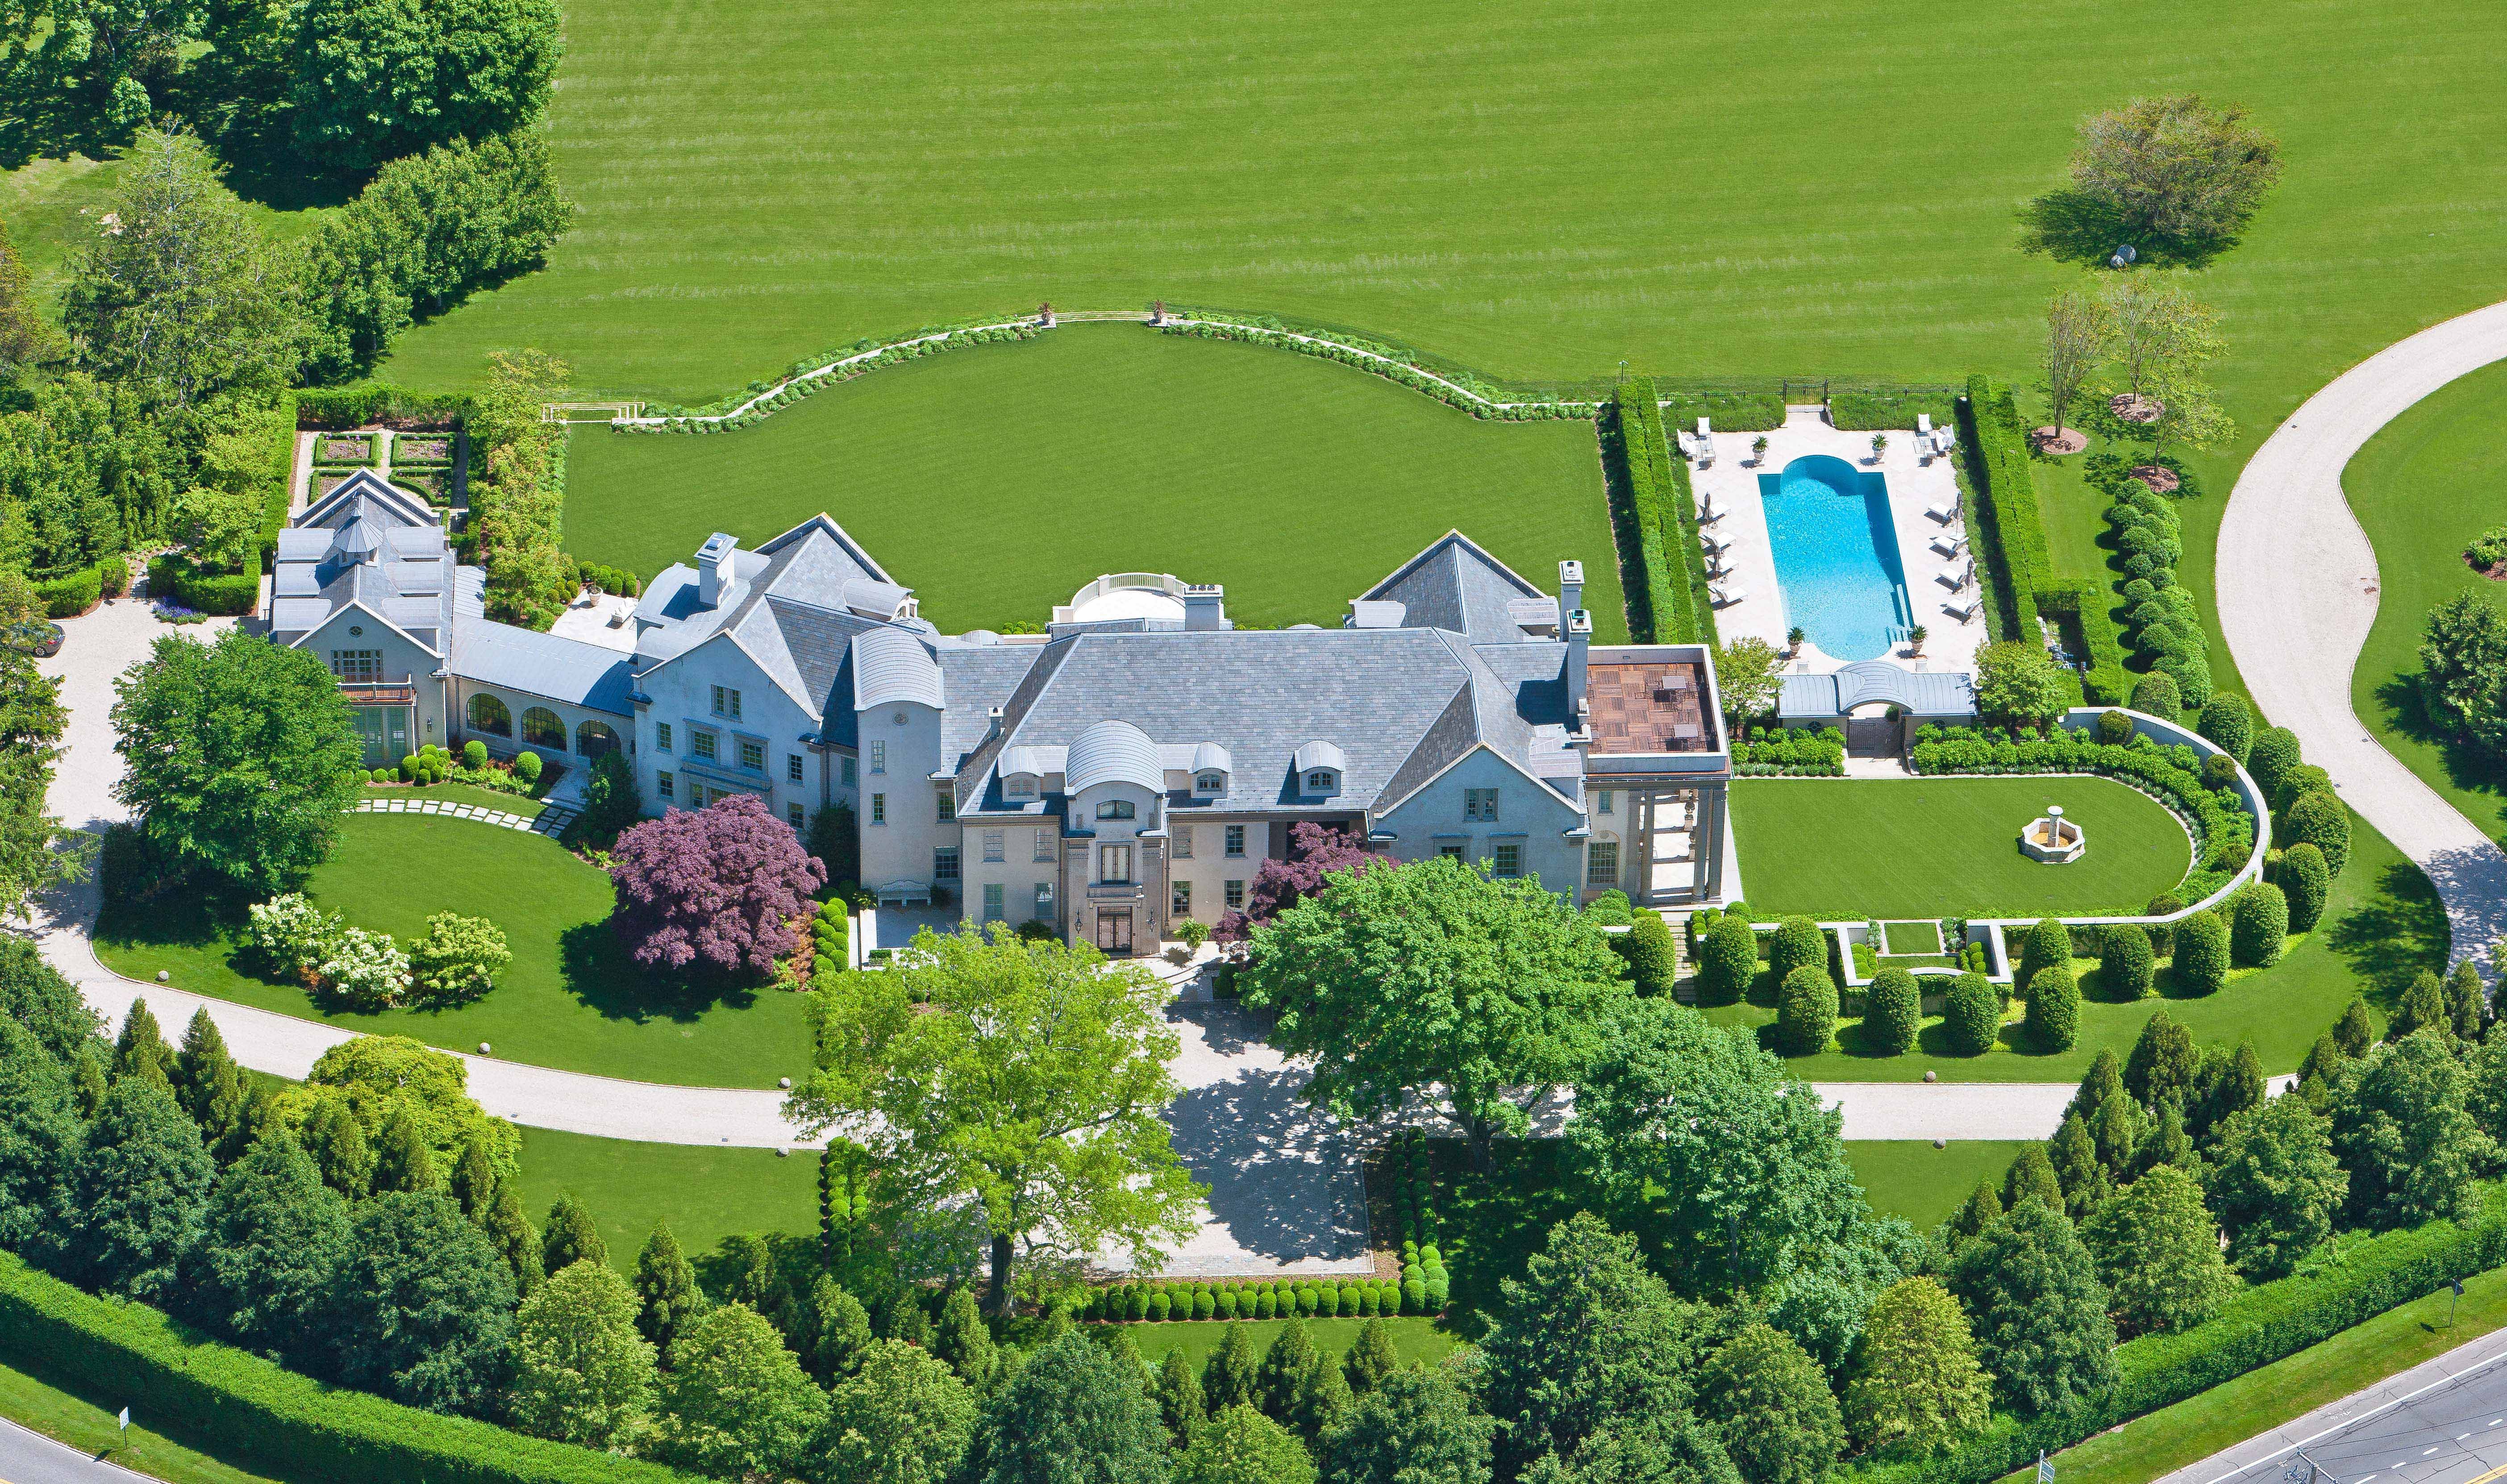 Inside the Late Vince Camuto's Palatial Connecticut Home